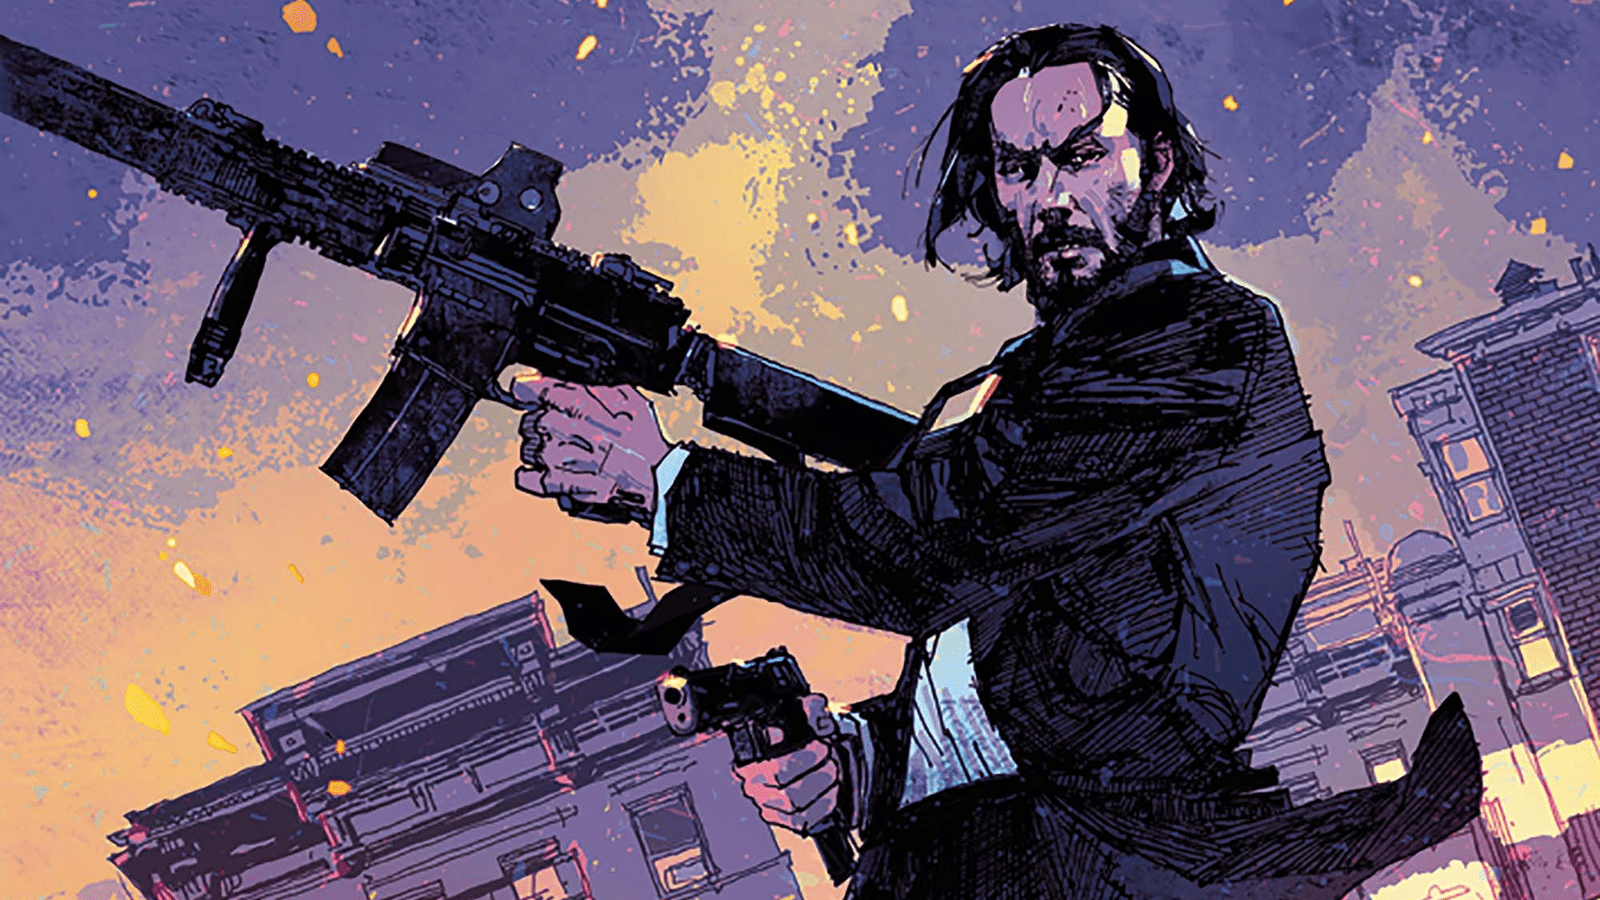 John Wick is back in a new comic series from the Wachowskis - John Wick